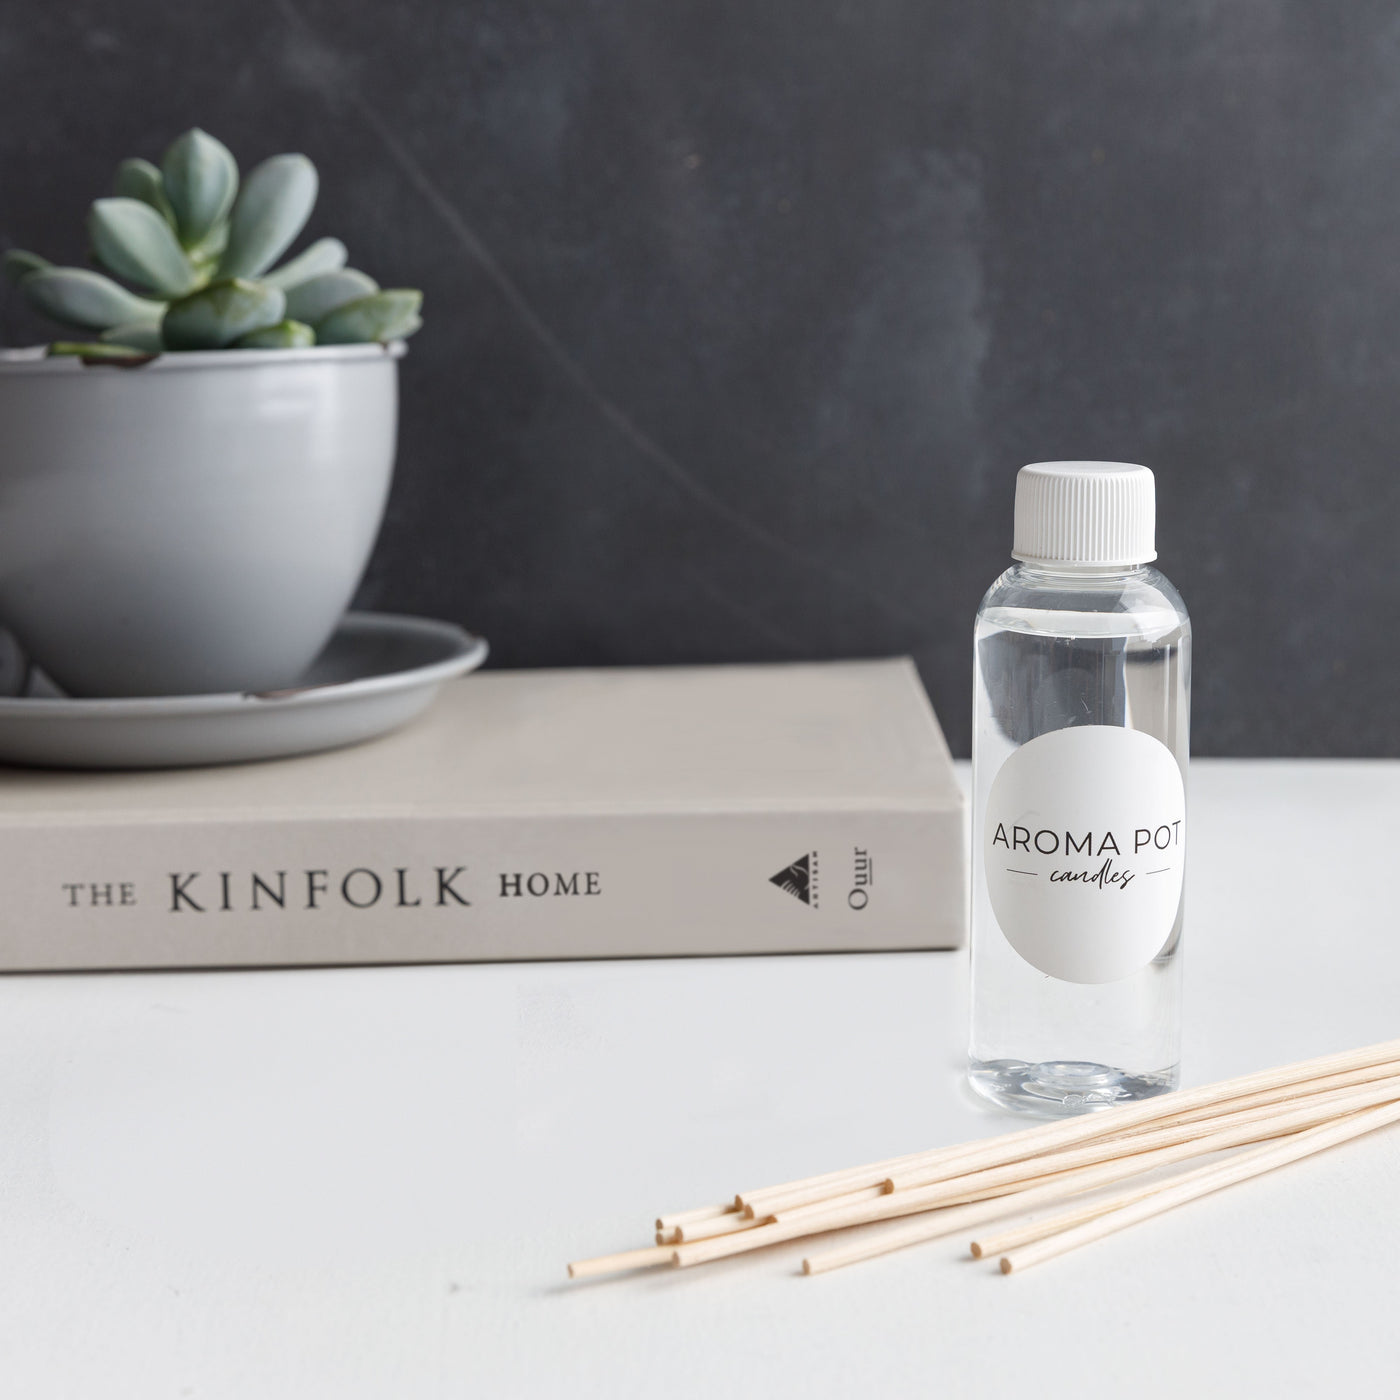 diffuser refill + new set of reeds - select your scent